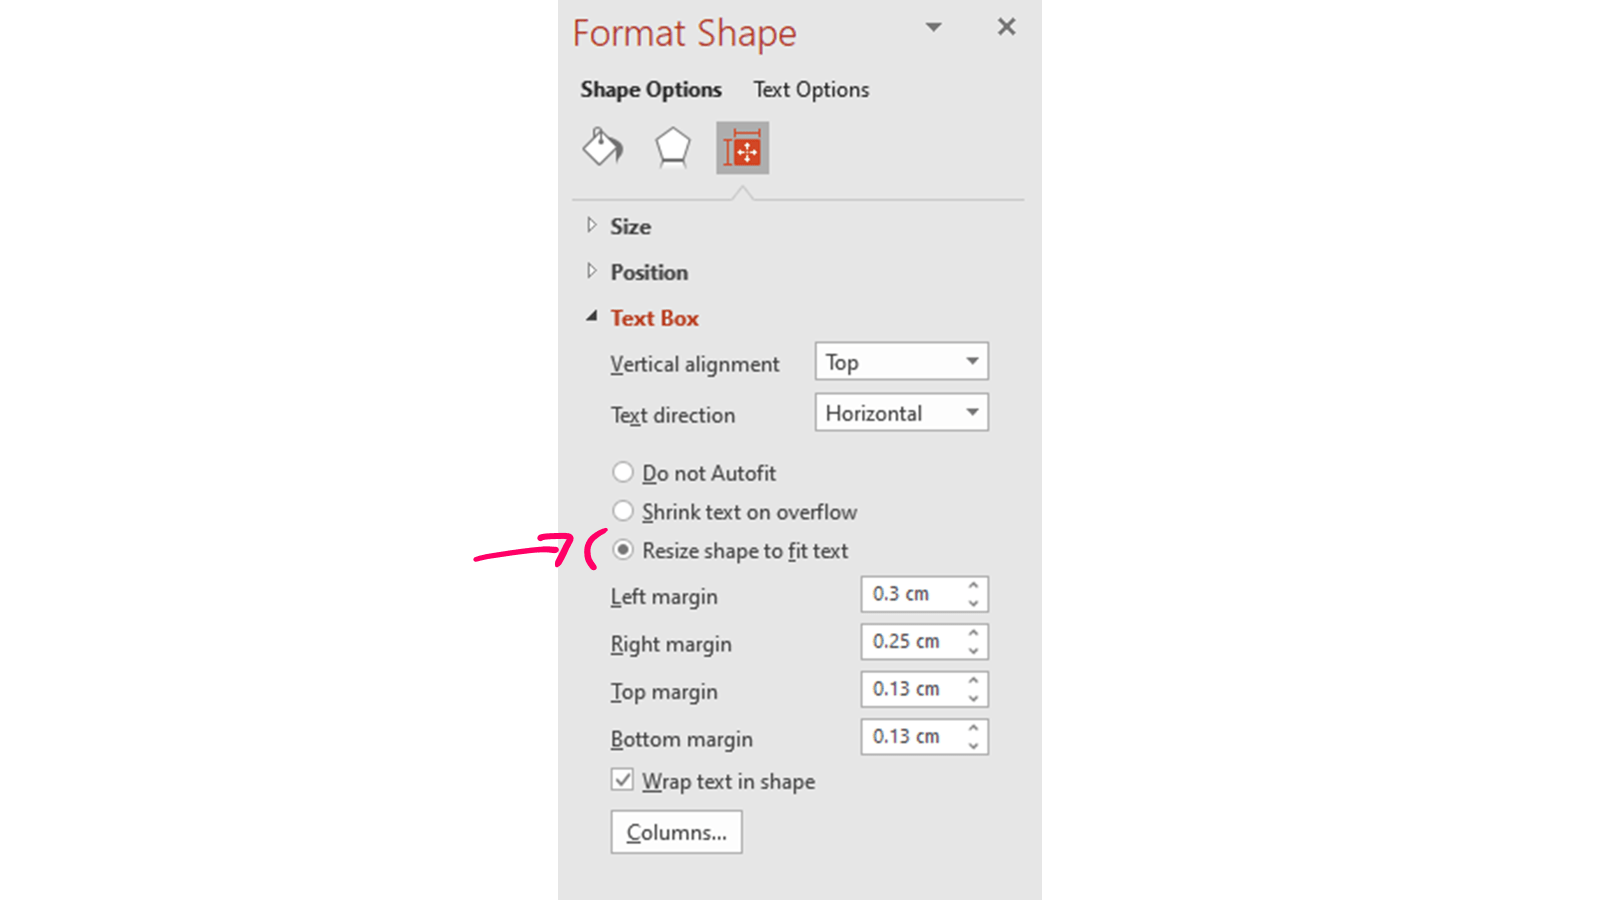 Annotated PowerPoint Format Shape options screenshot with "Resize shape to fit text" selected